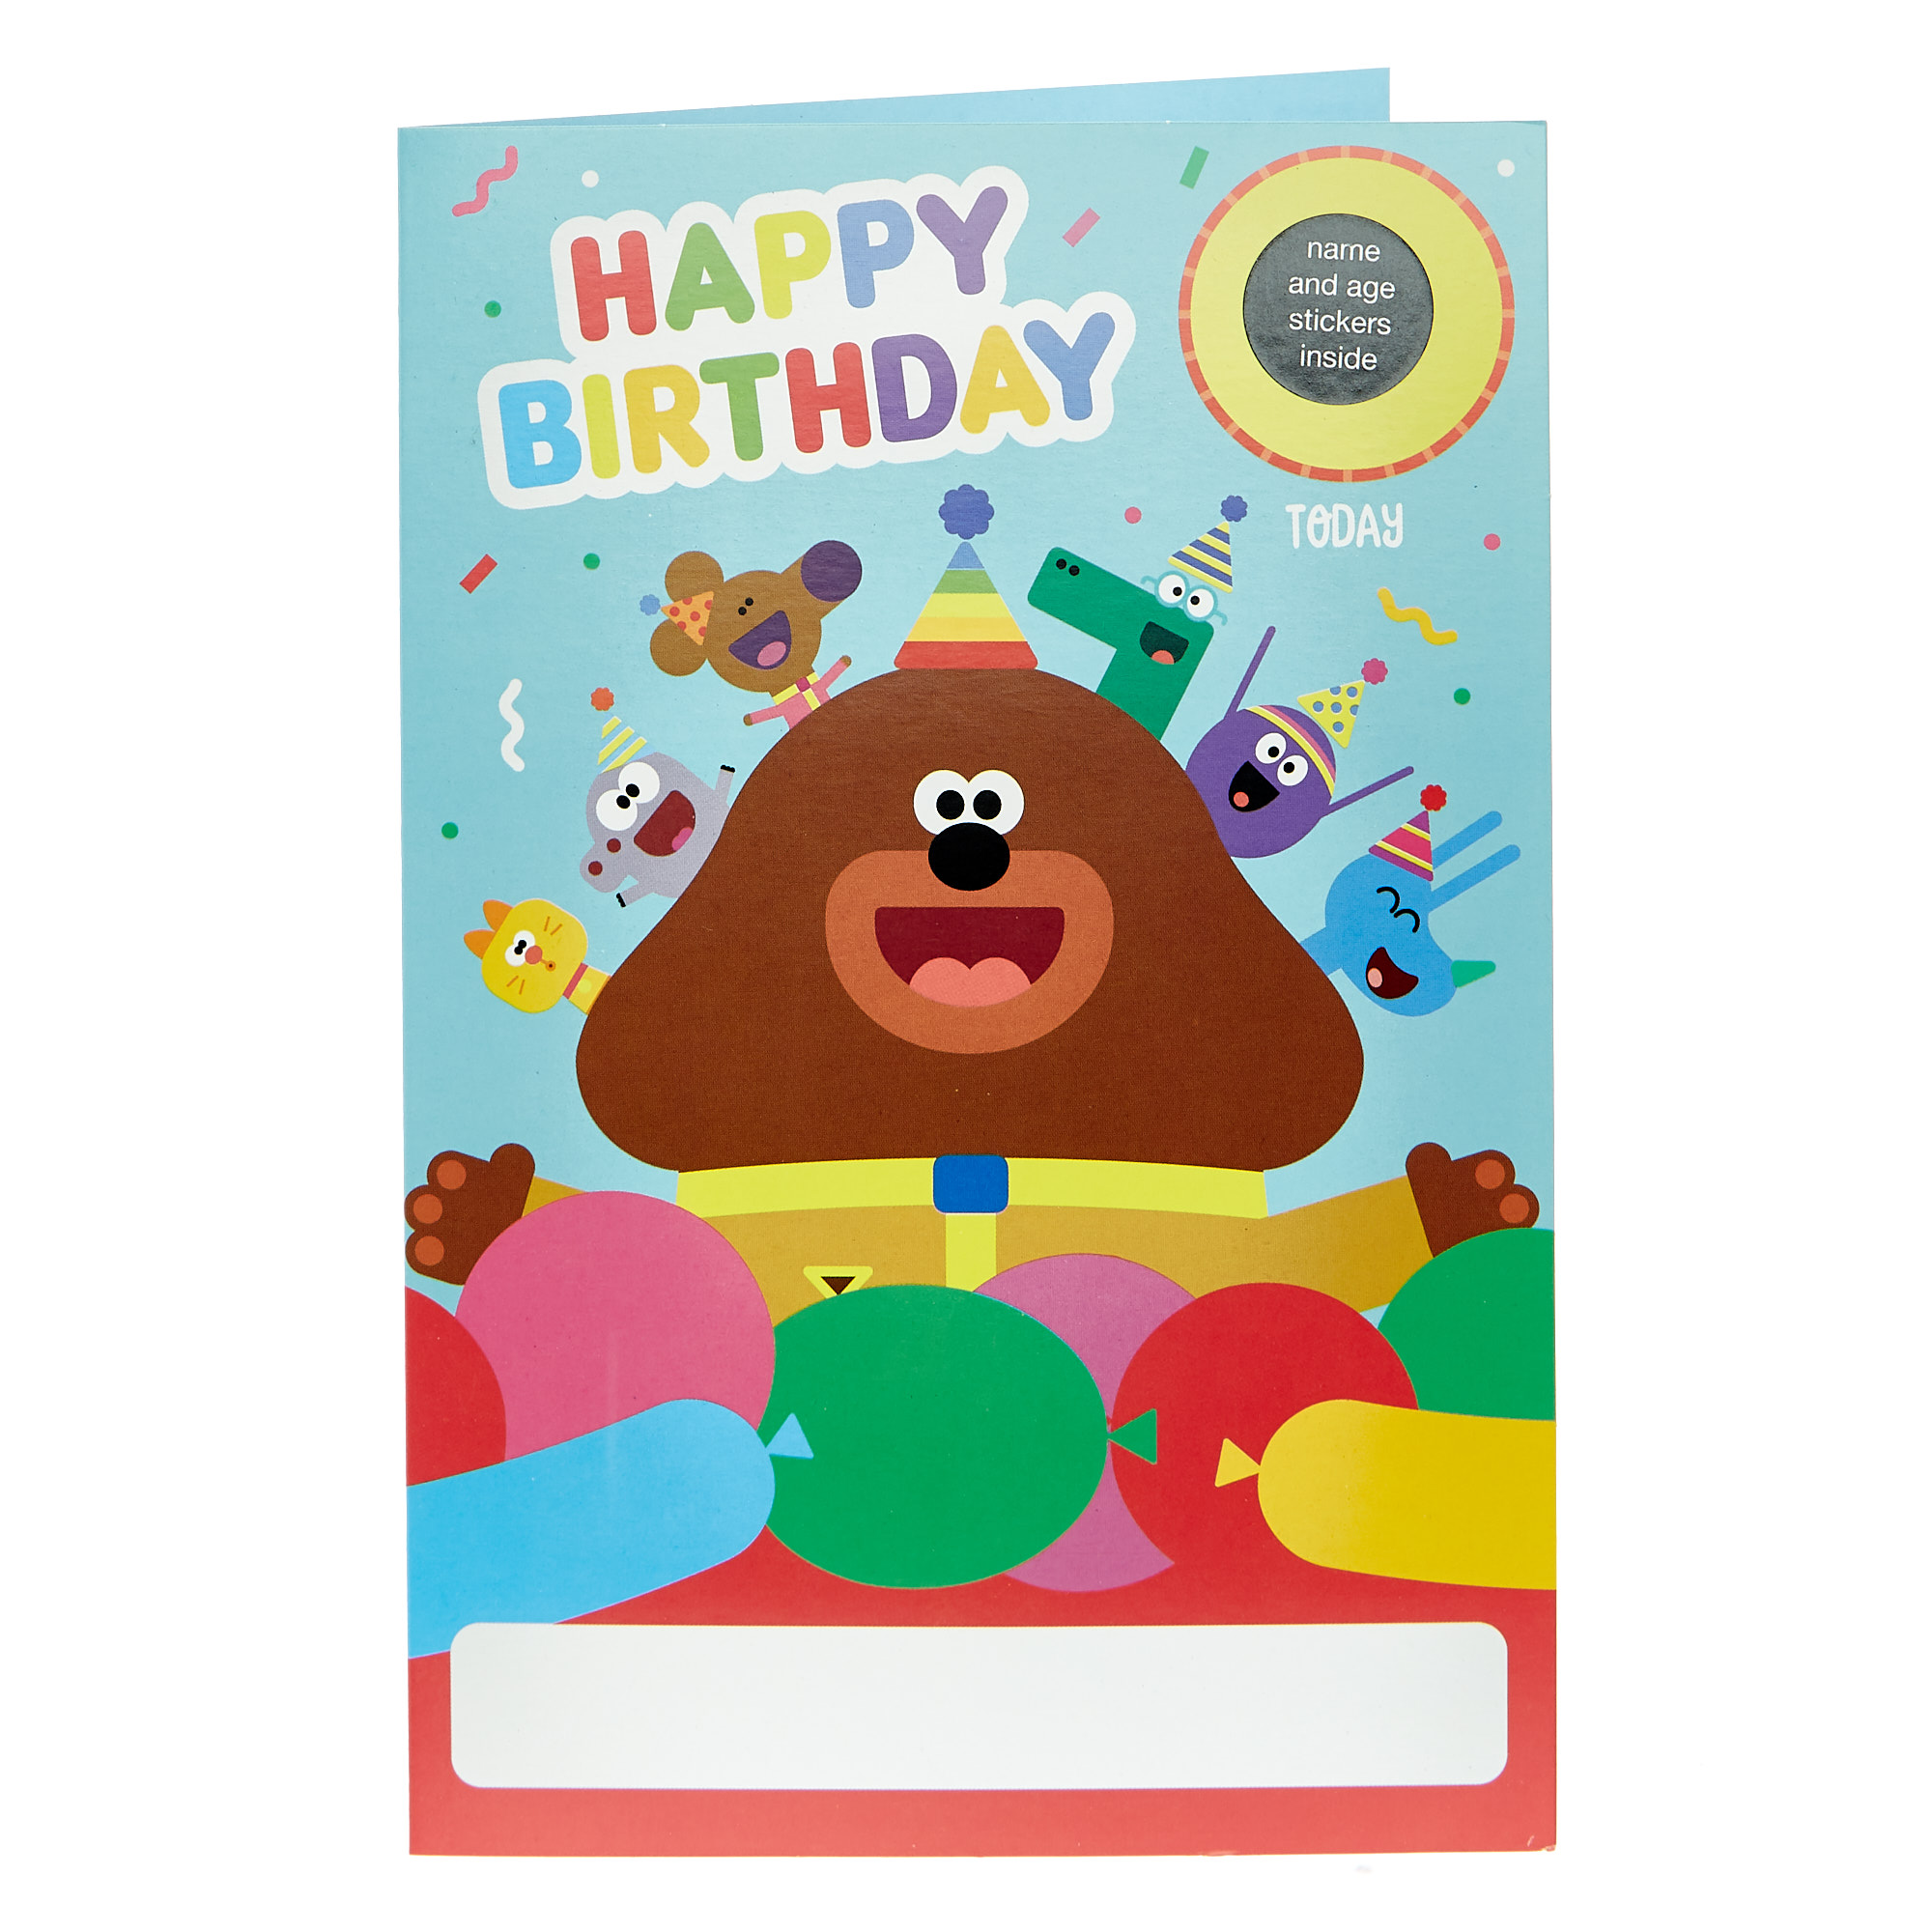 Hey Duggee Birthday Card - Name & Age Stickers